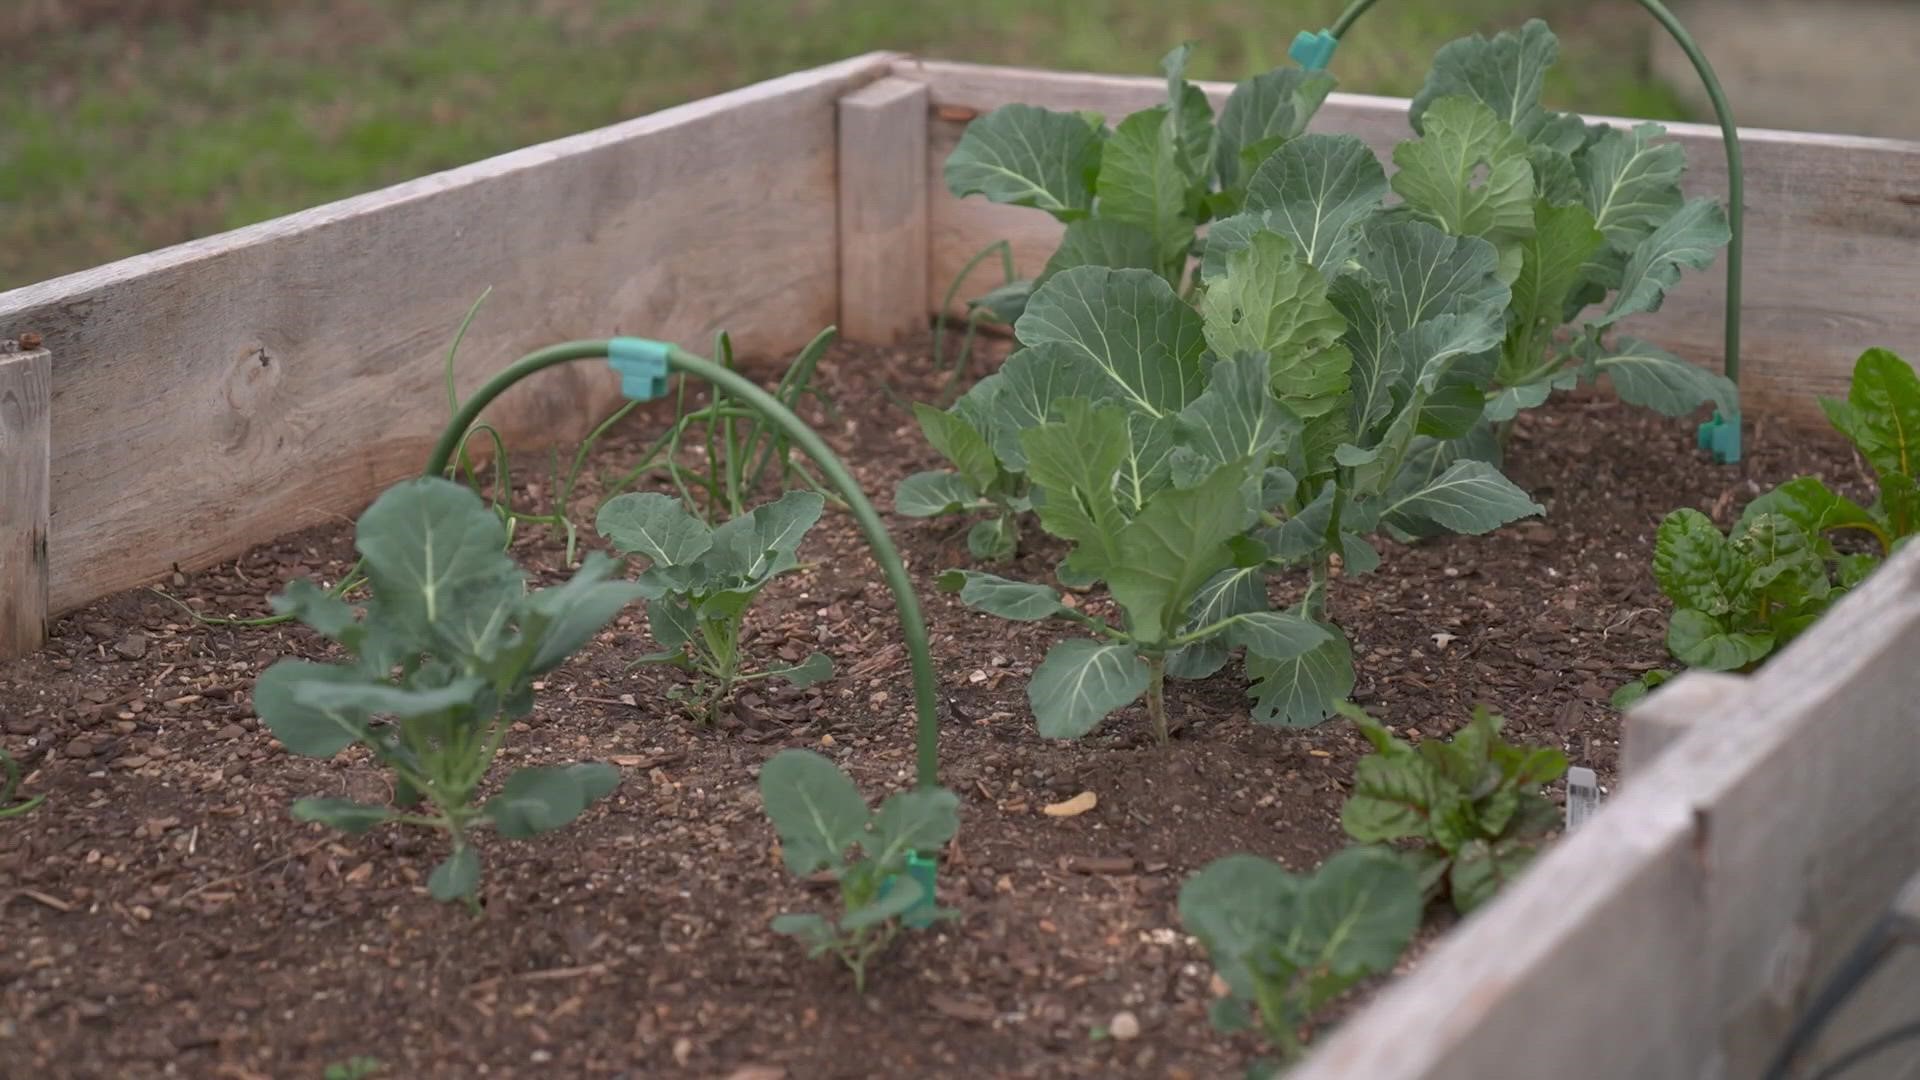 Southside Community Garden has set up 64 backyard gardens in the 76104 zip code, which has the lowest life expectancy in the state.